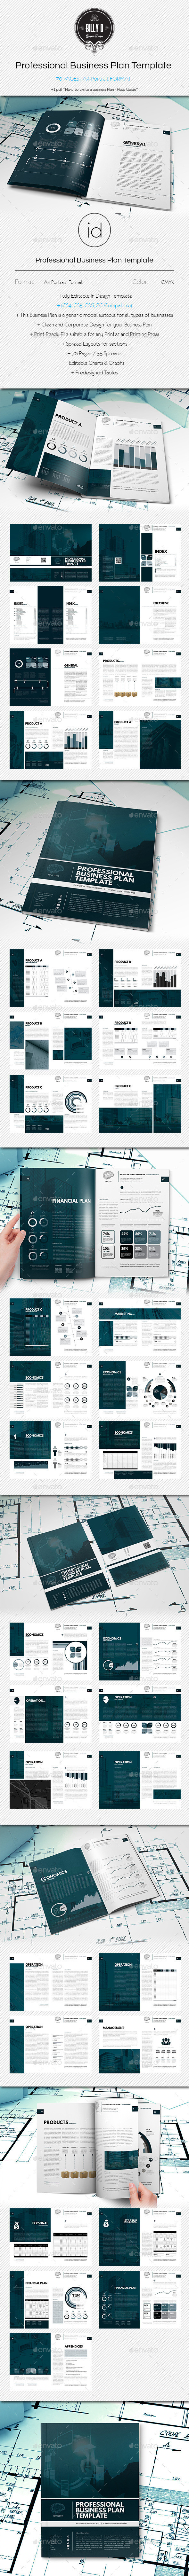 Professional 20business 20plan 20template 20preview 20image 20590x